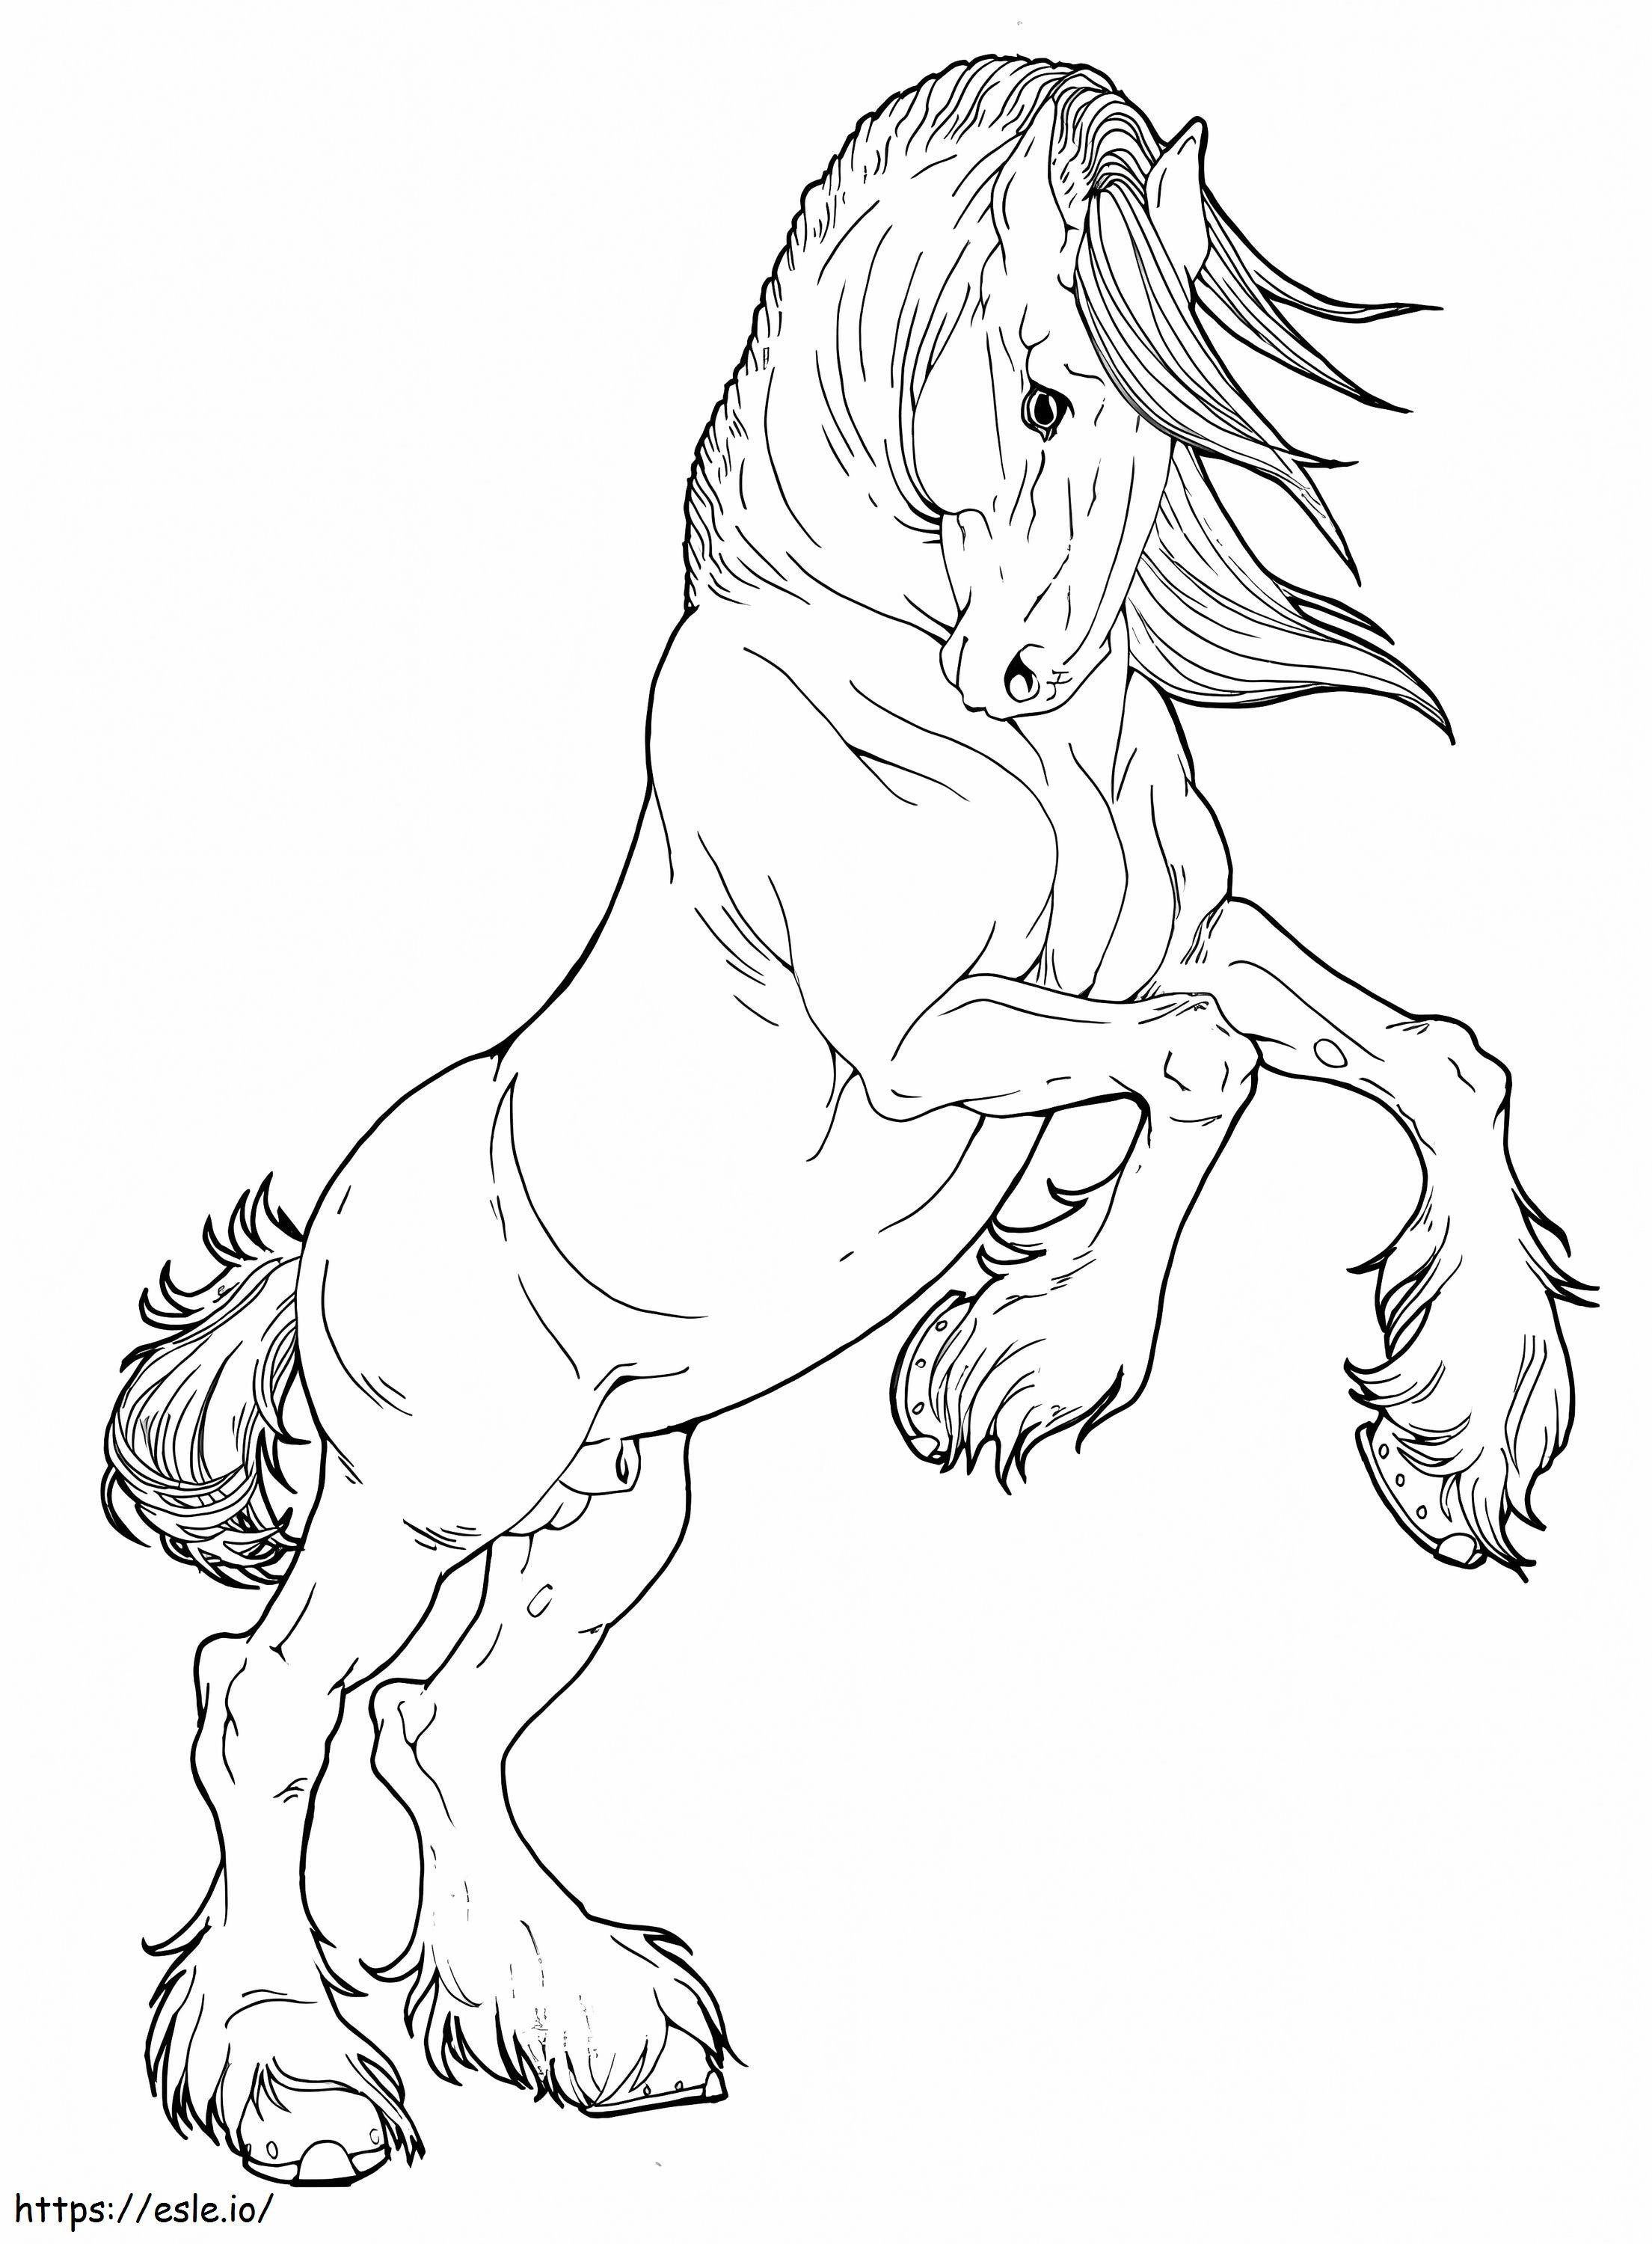 Horse Looks Cool coloring page